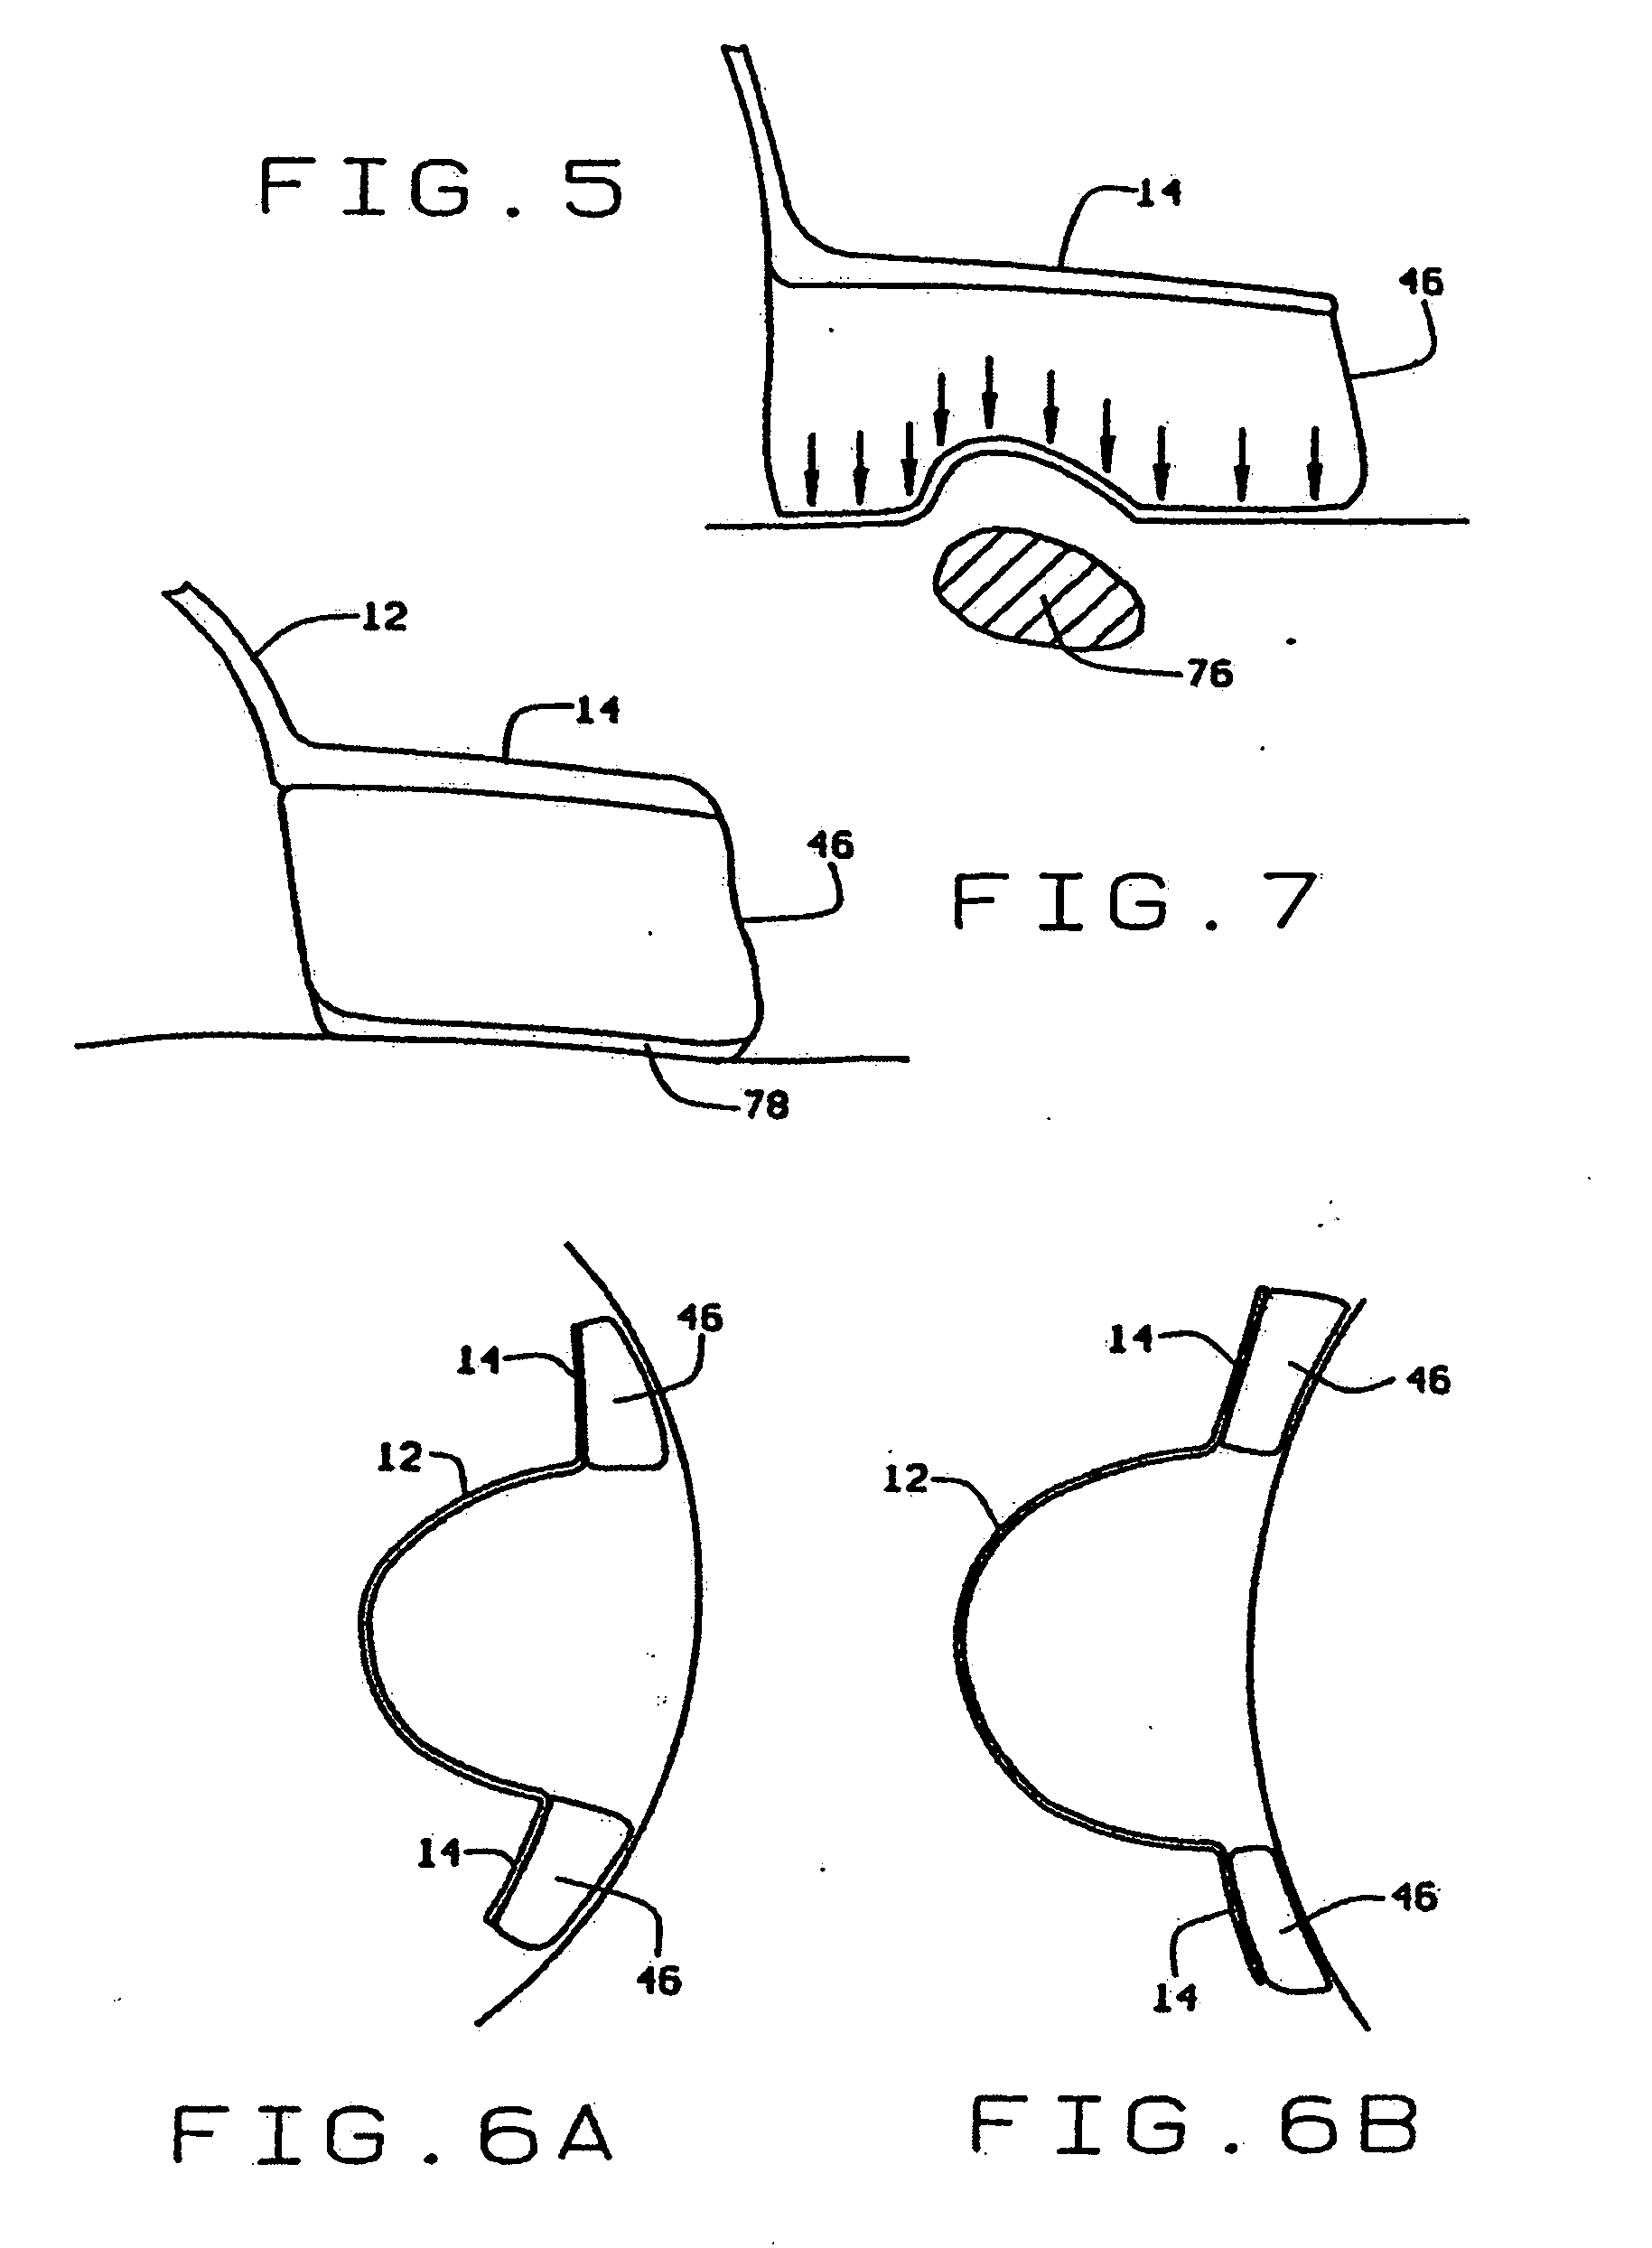 Method and apparatus for inhibiting the growth of and shrinking cancerous tumors